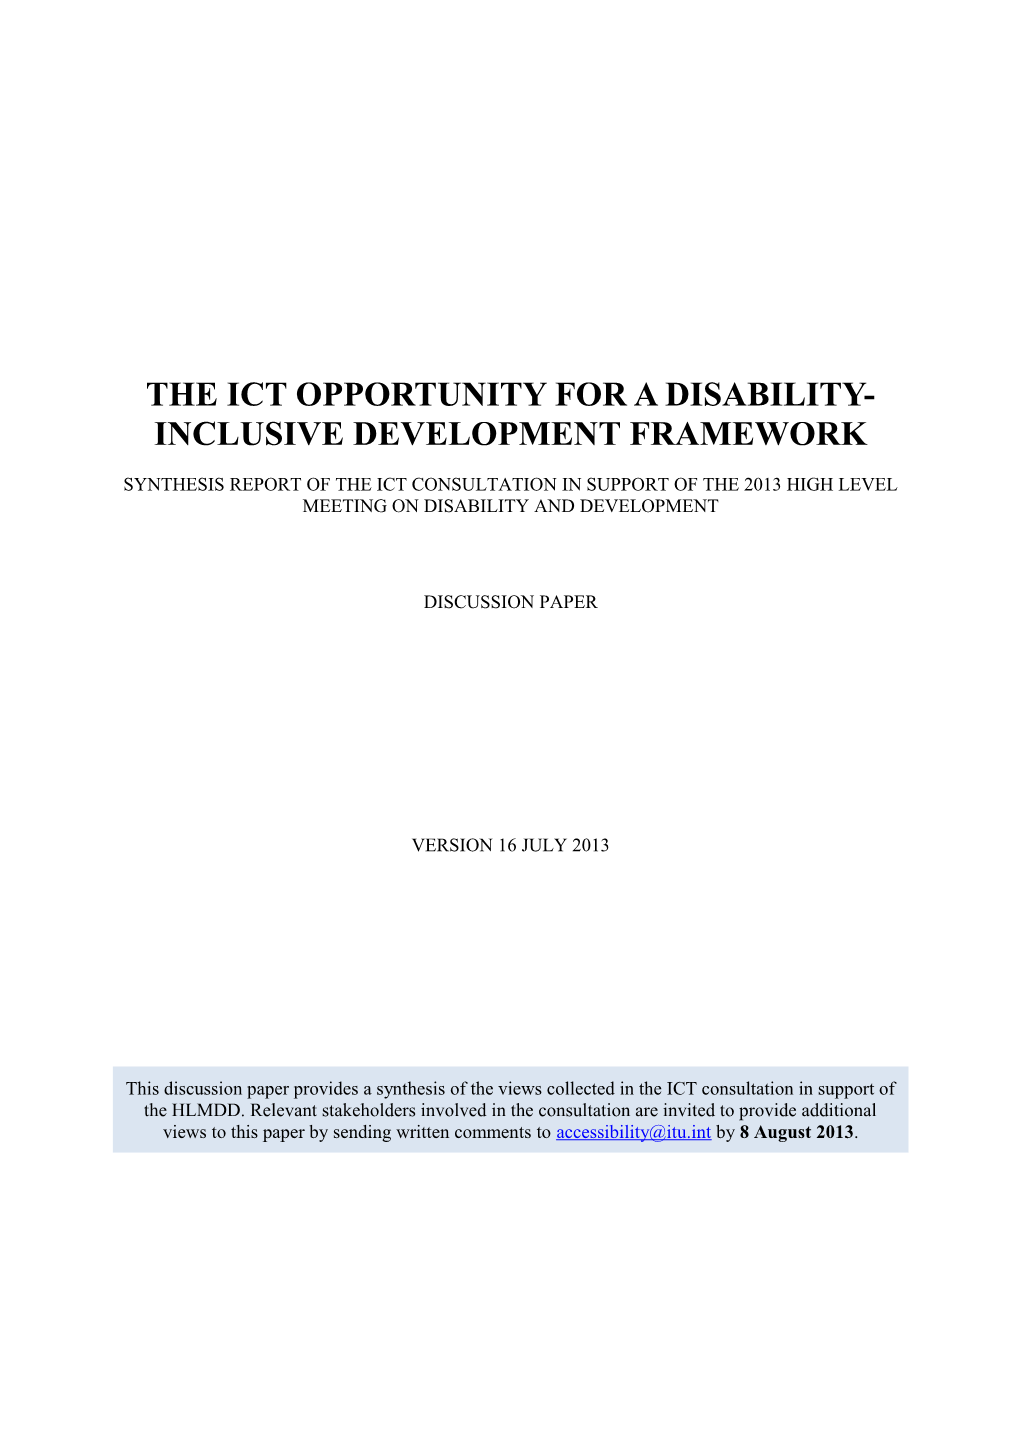 The Ict Opportunity for a Disability-Inclusive Development Framework